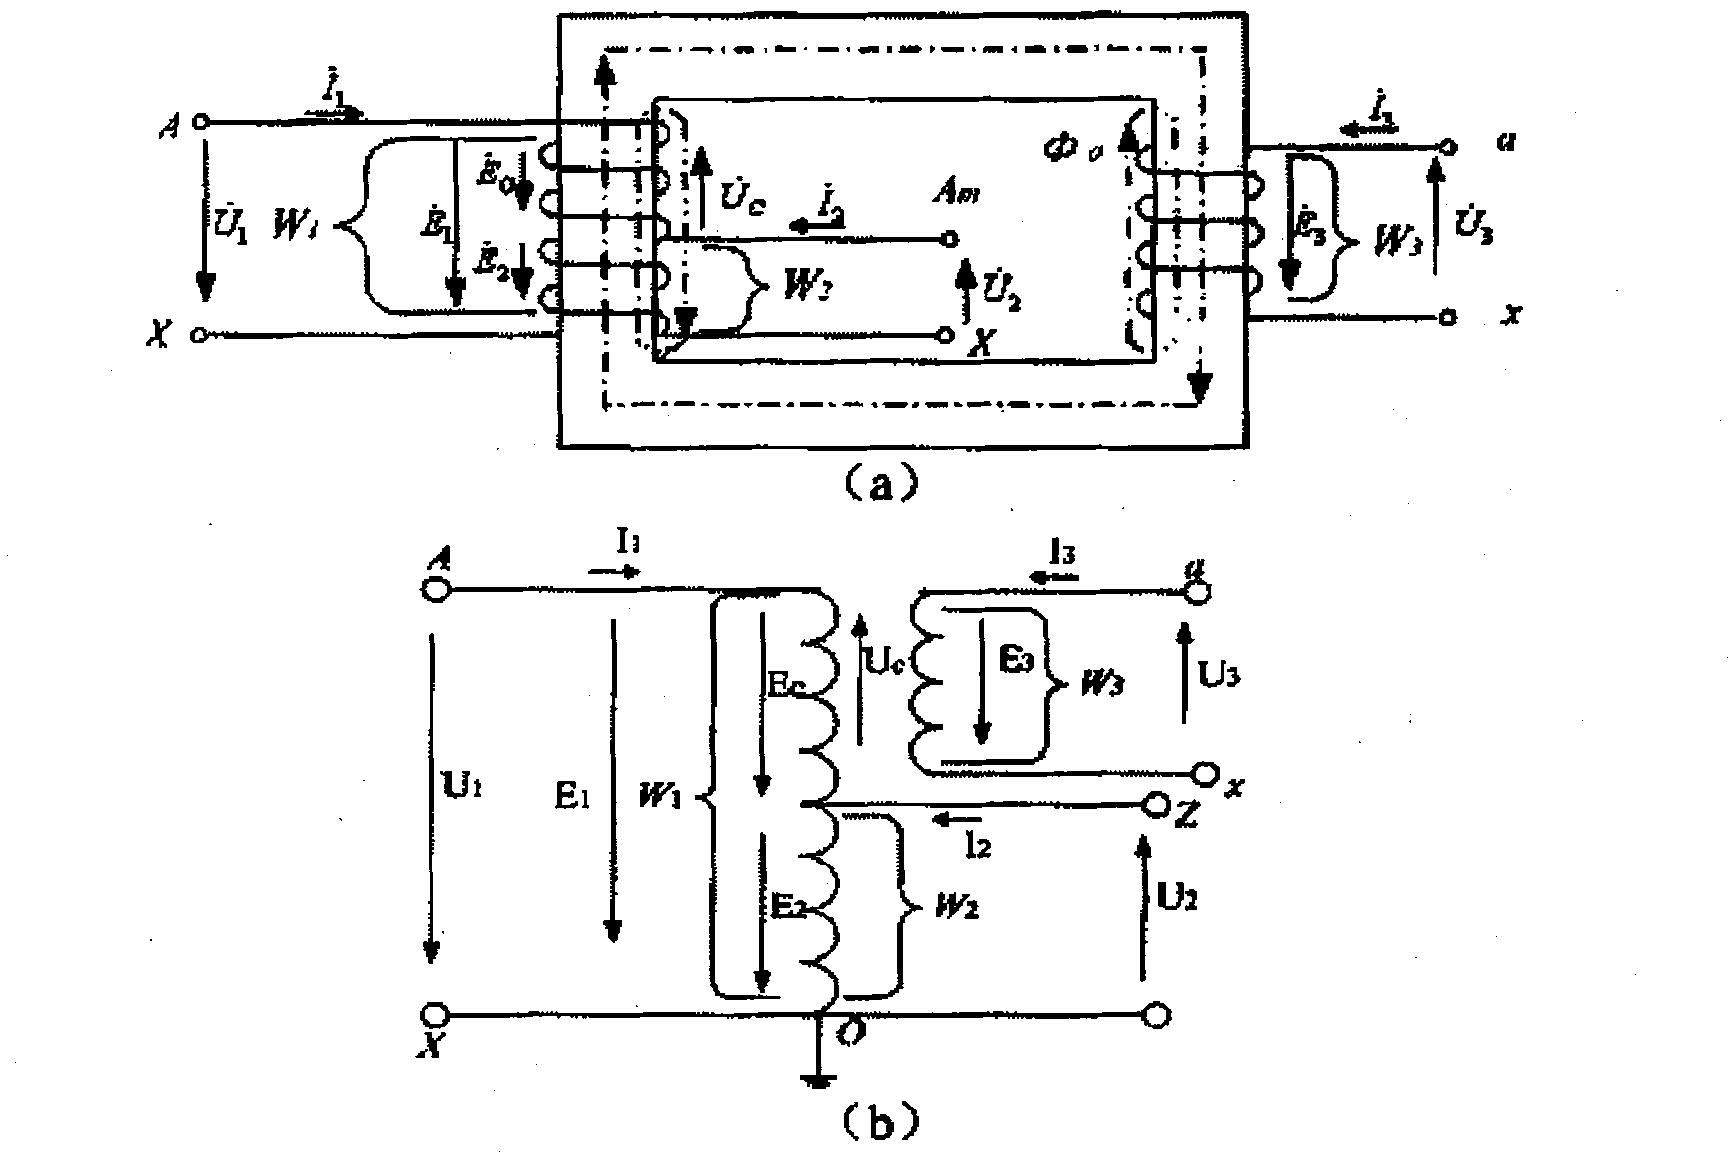 Single-phase three-winding autotransformer model taking account of nonlinear influences of excitation impedance